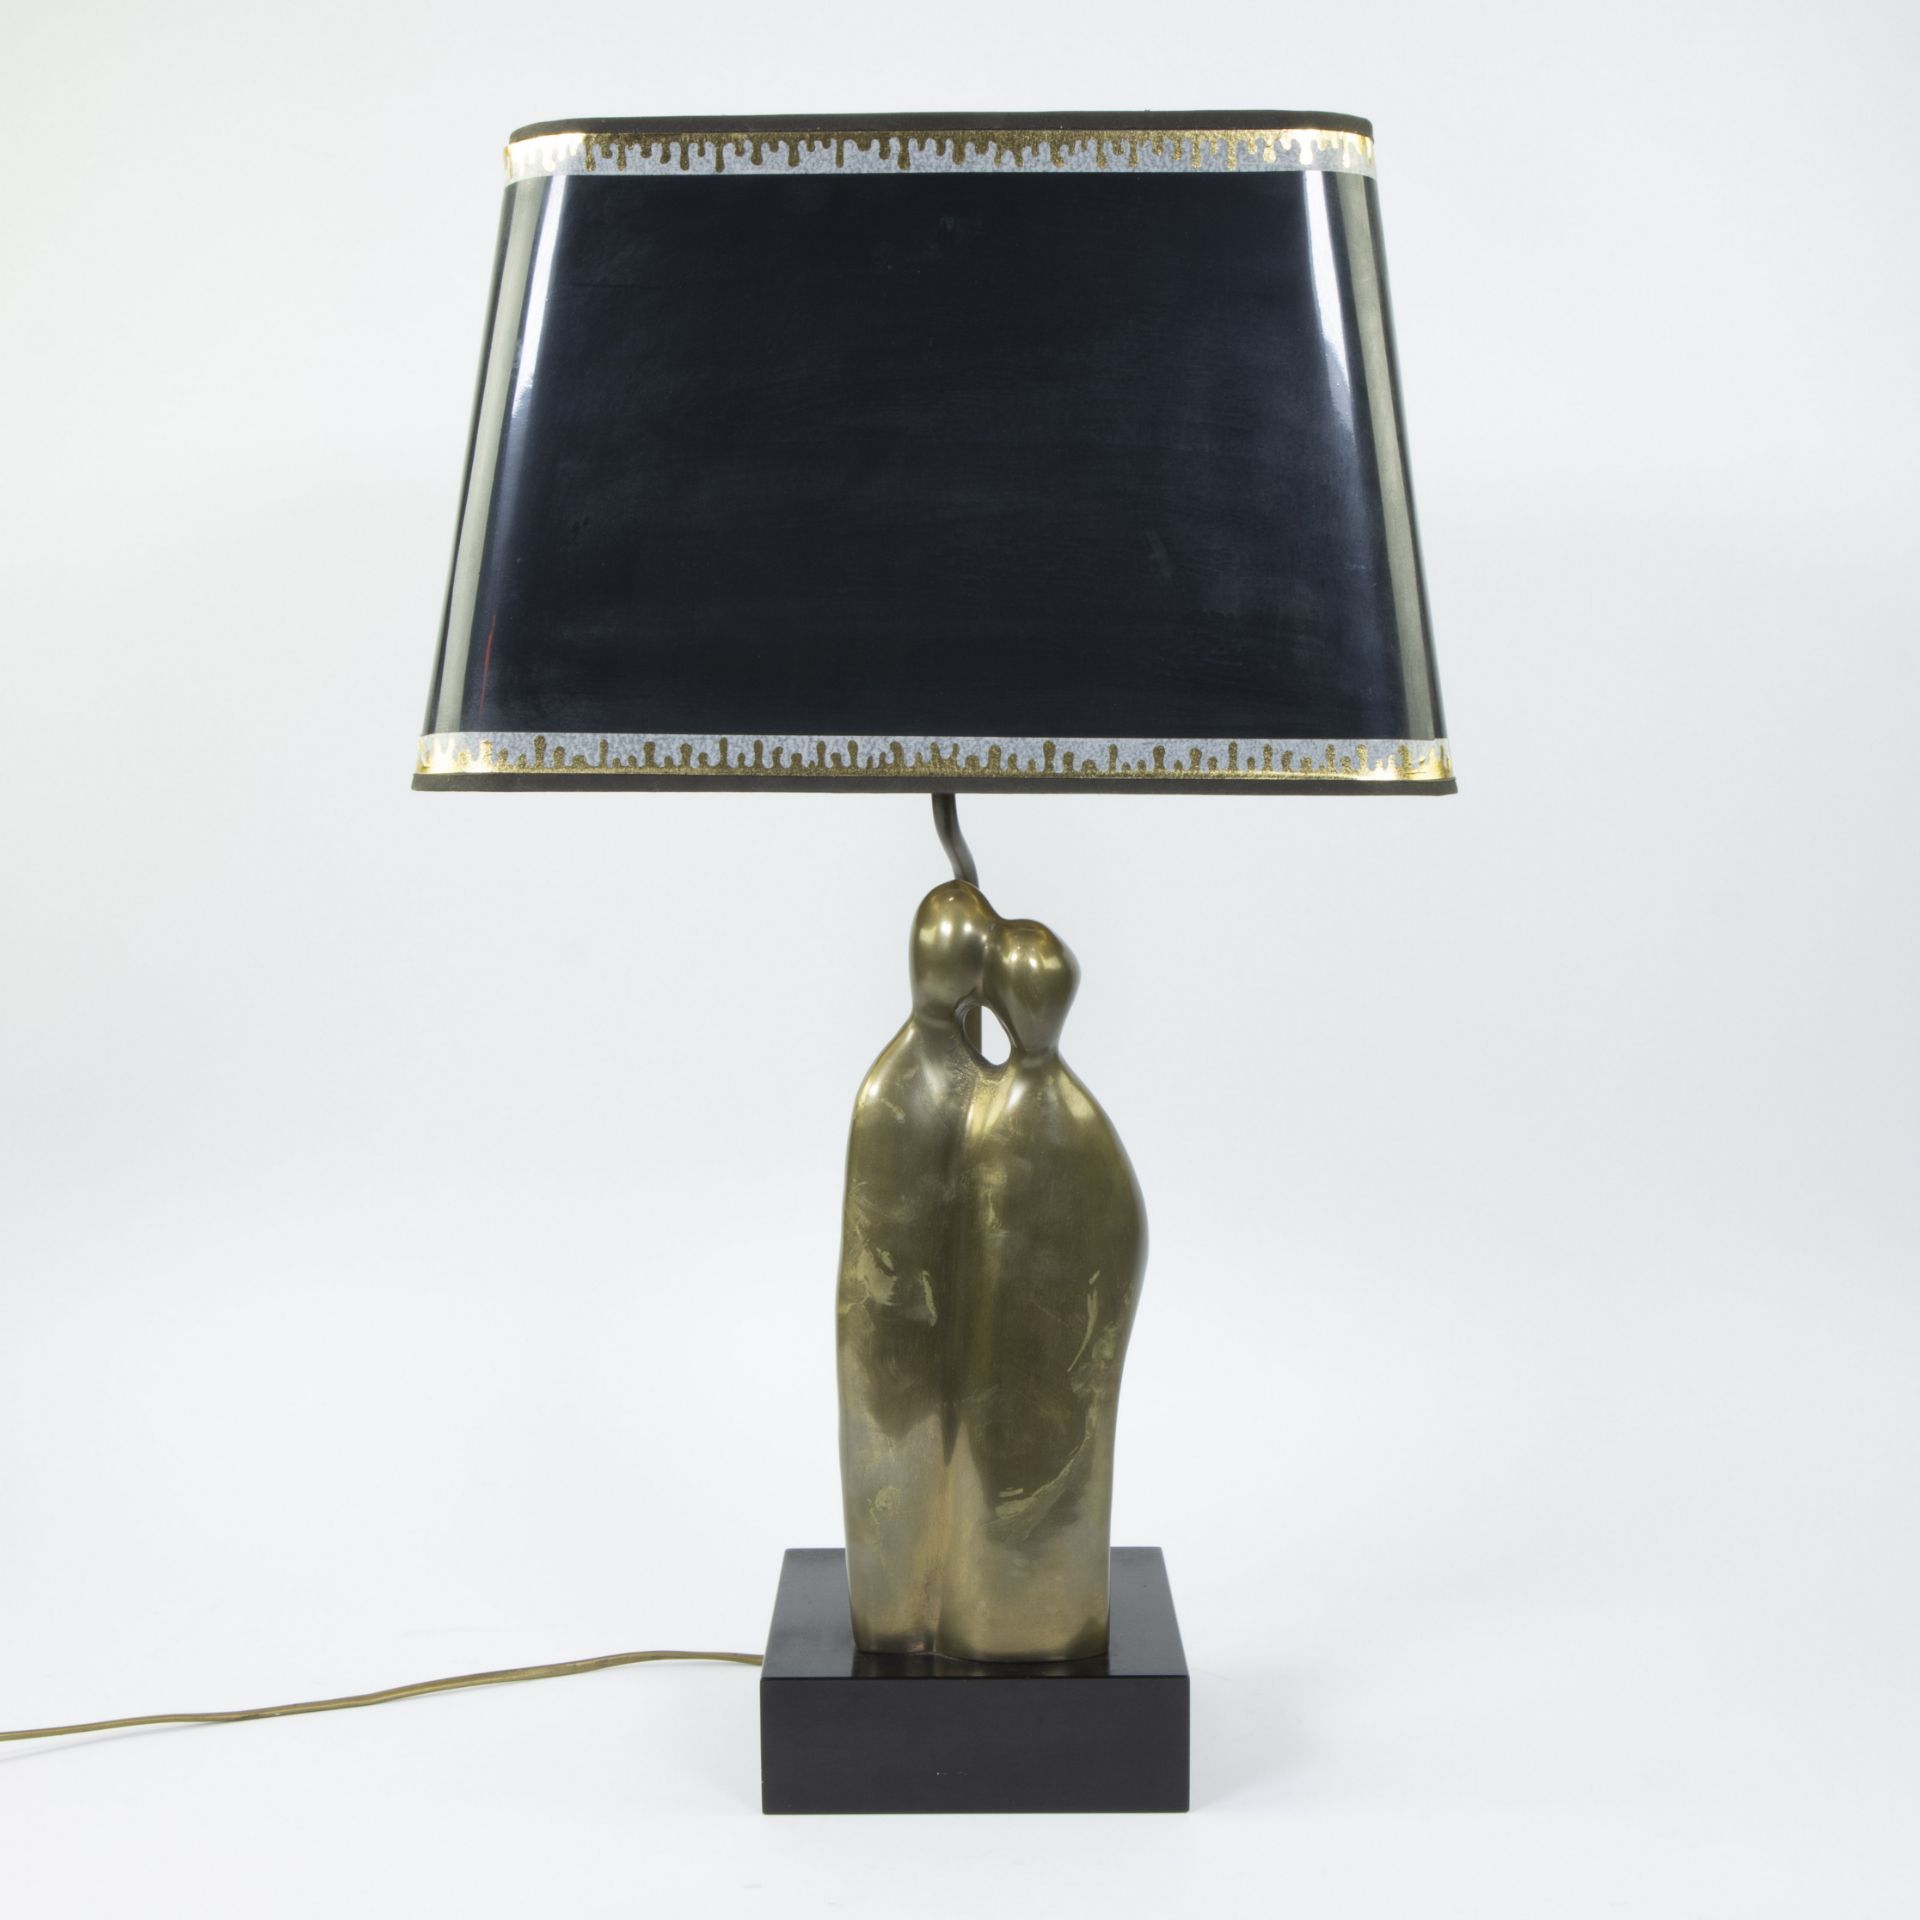 Vintage brass table lamp, style Maison Charles